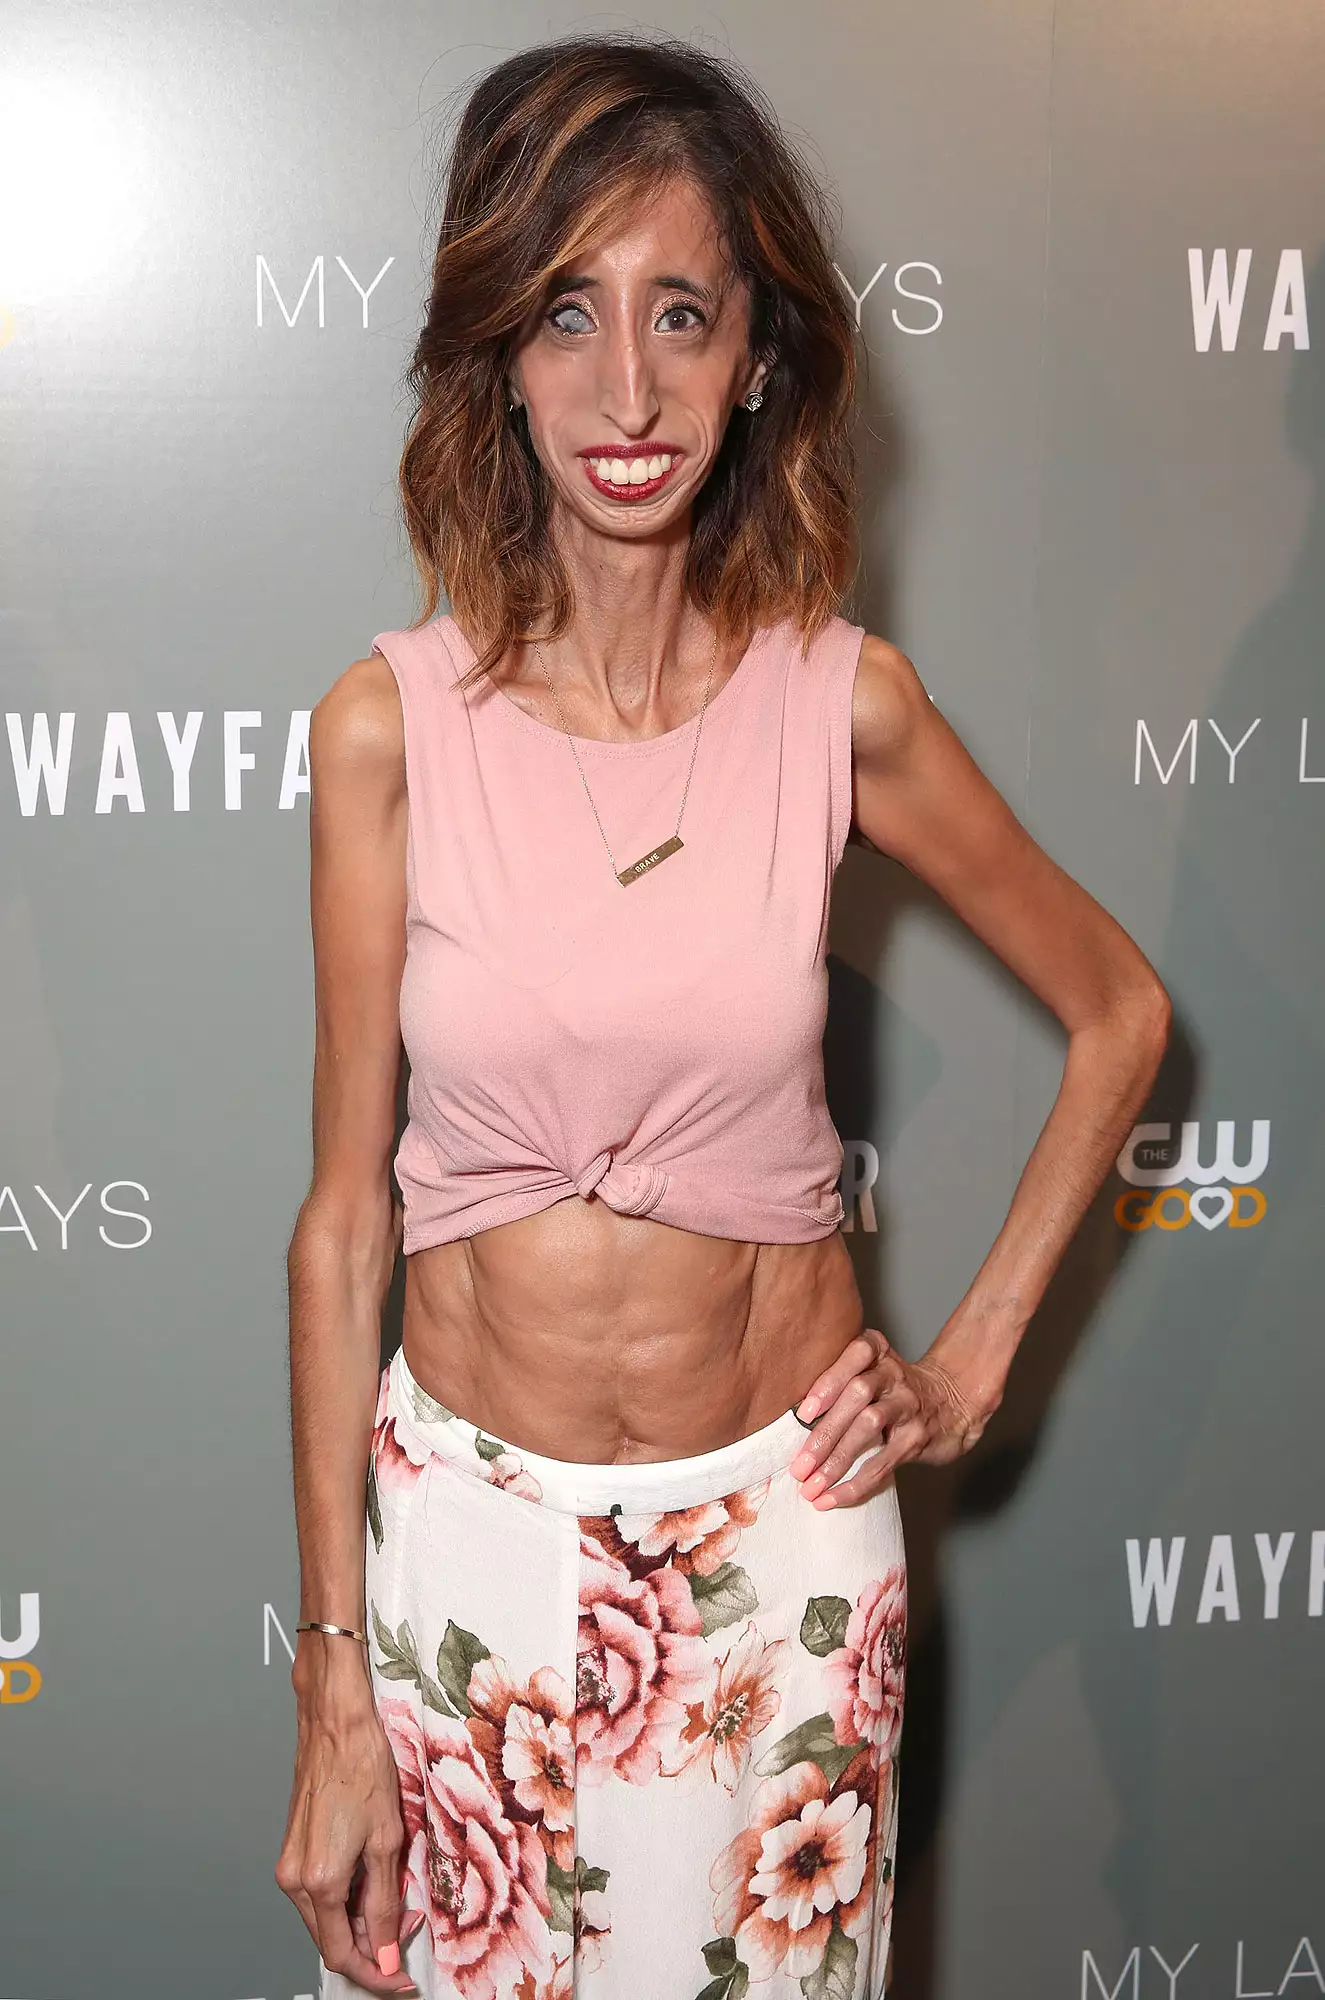 aleksandra wolak recommends the skinniest girl ever pic